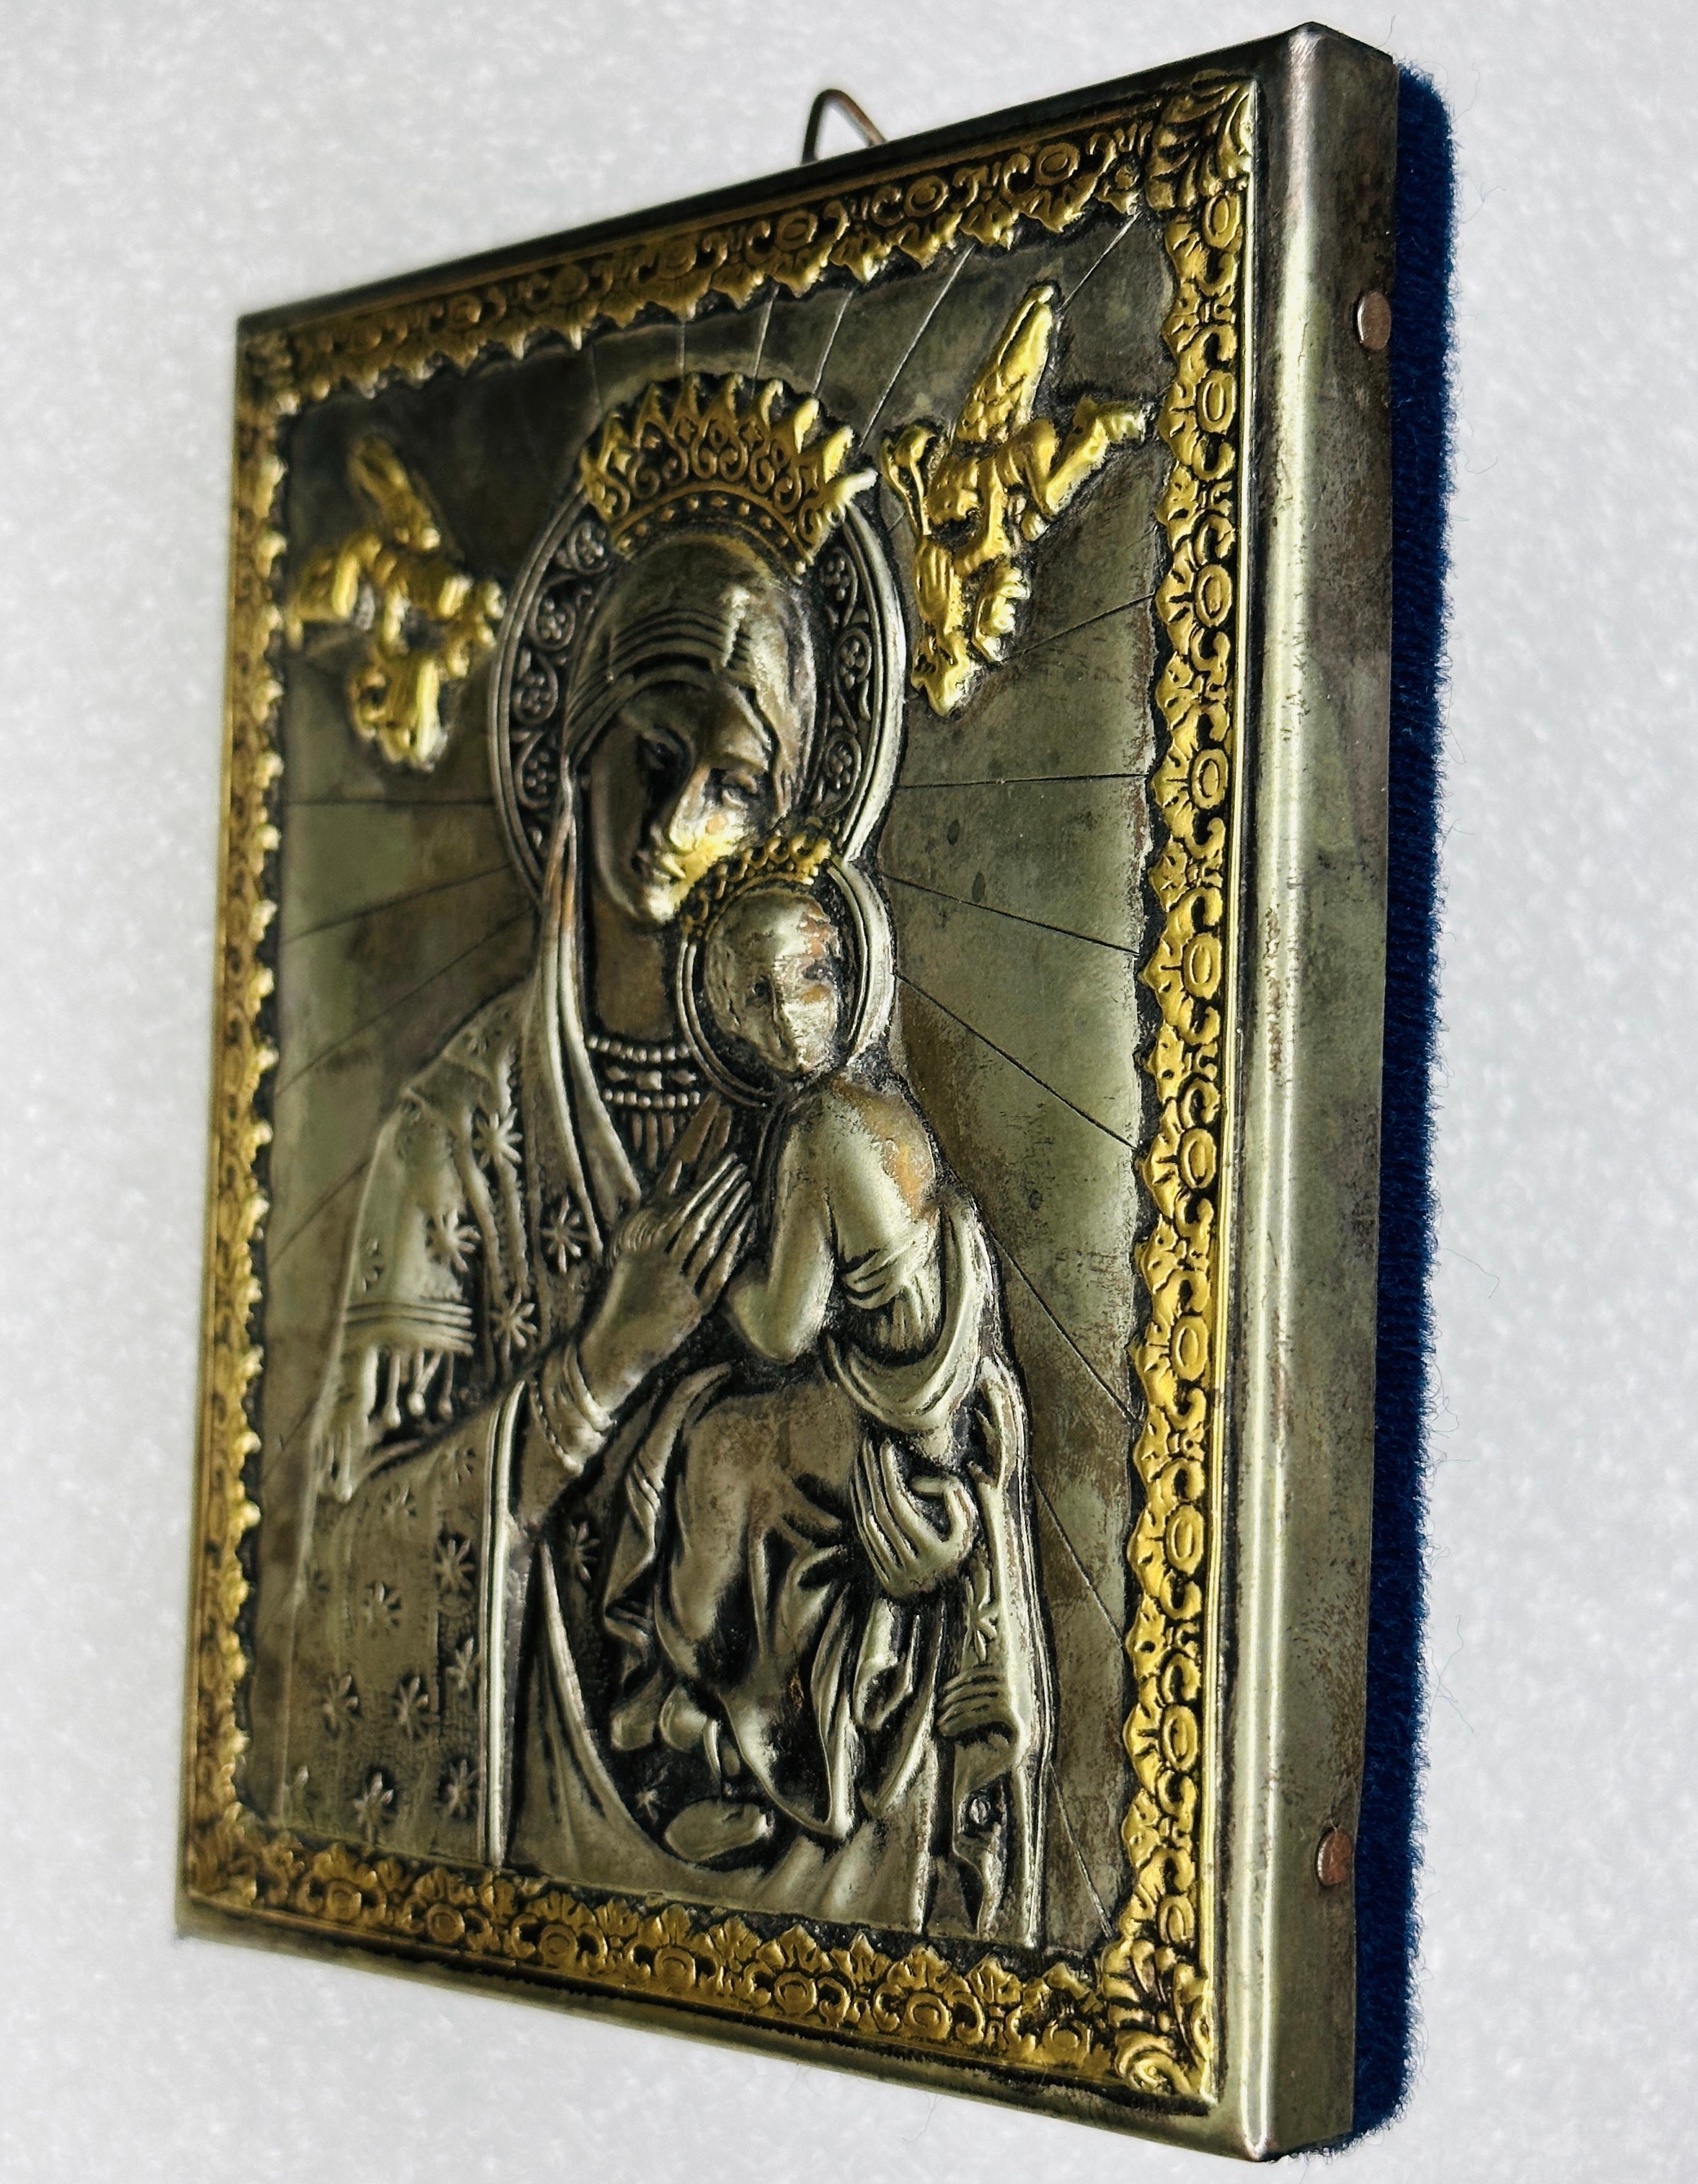 Etched Russian Icon of Madonna and Child in Repoussé Metal, Early 20th Century